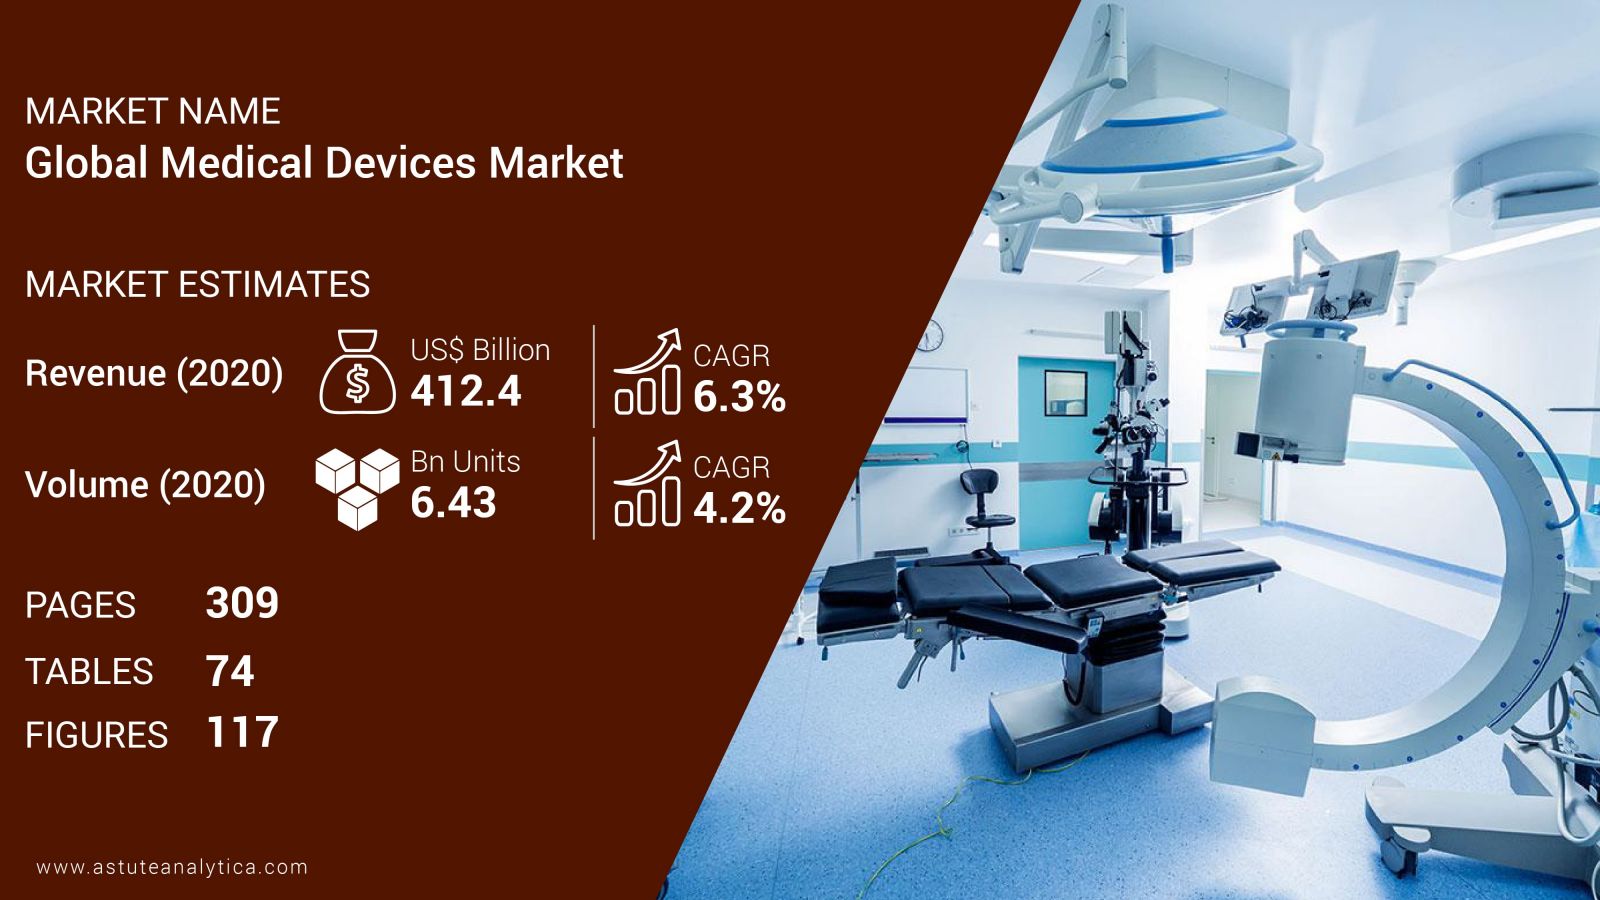 Global Medical Devices Market Report Scope